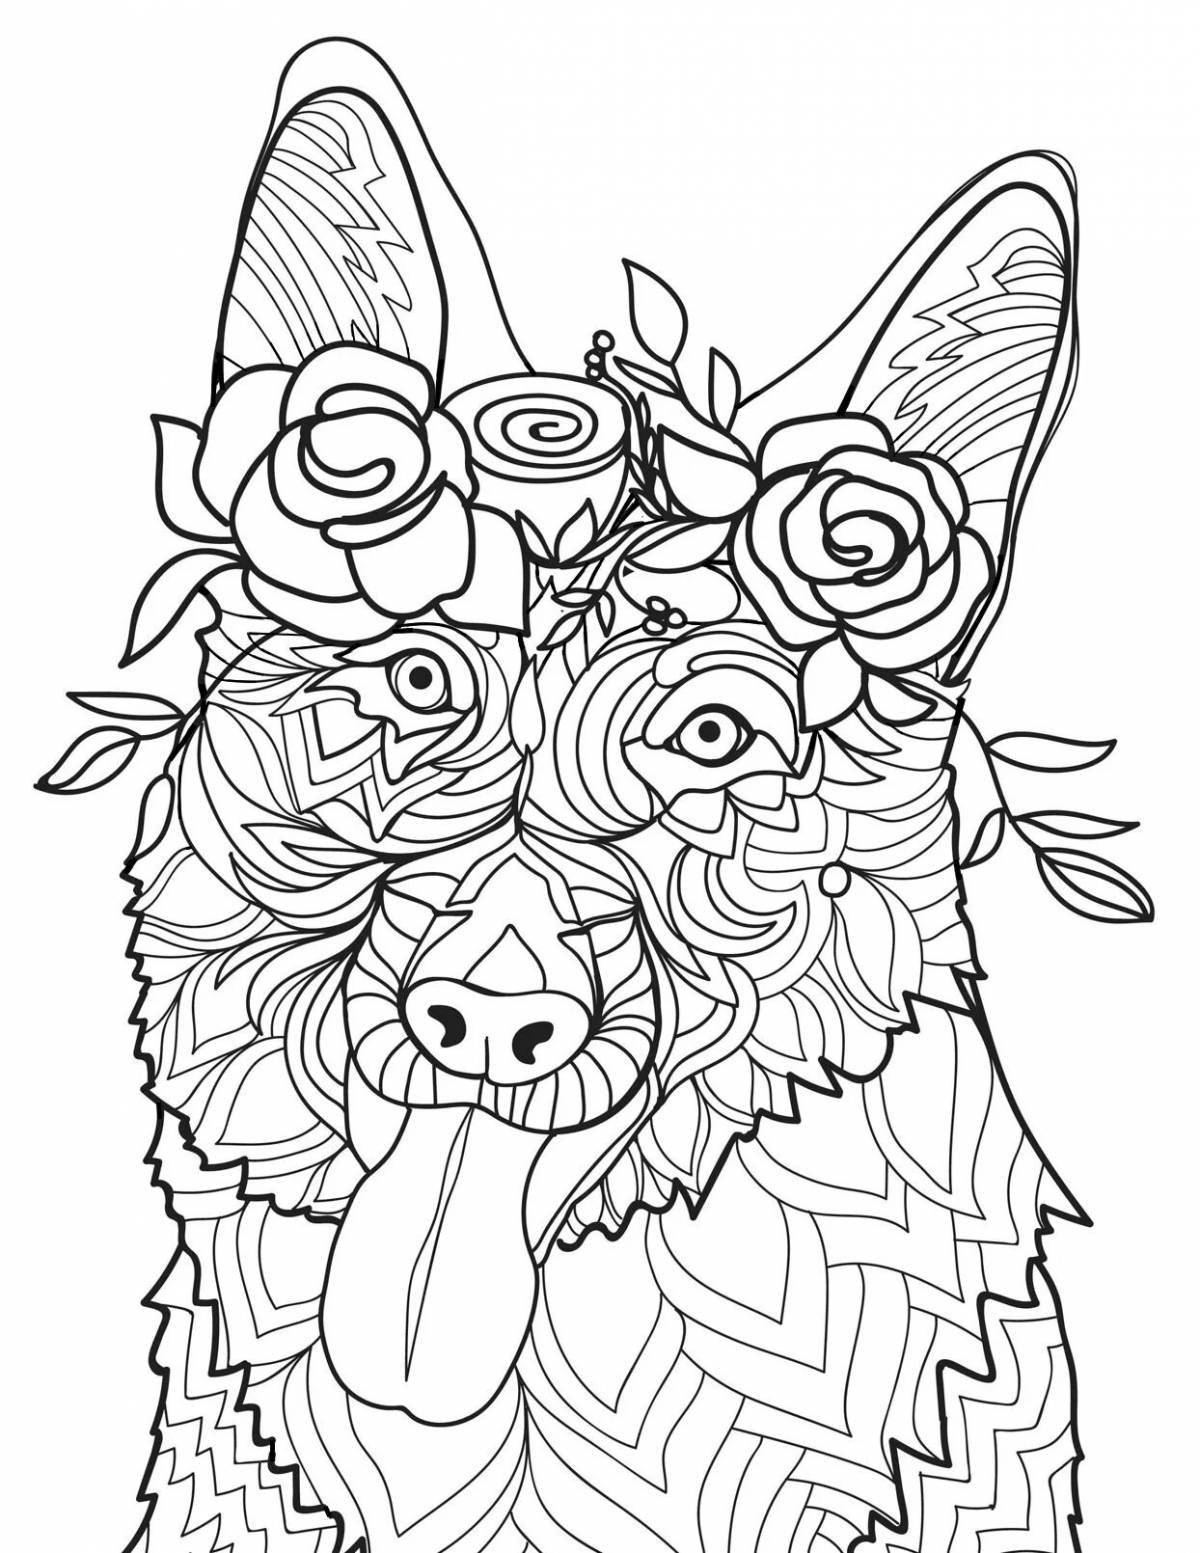 Inspiring Cute Coloring Page